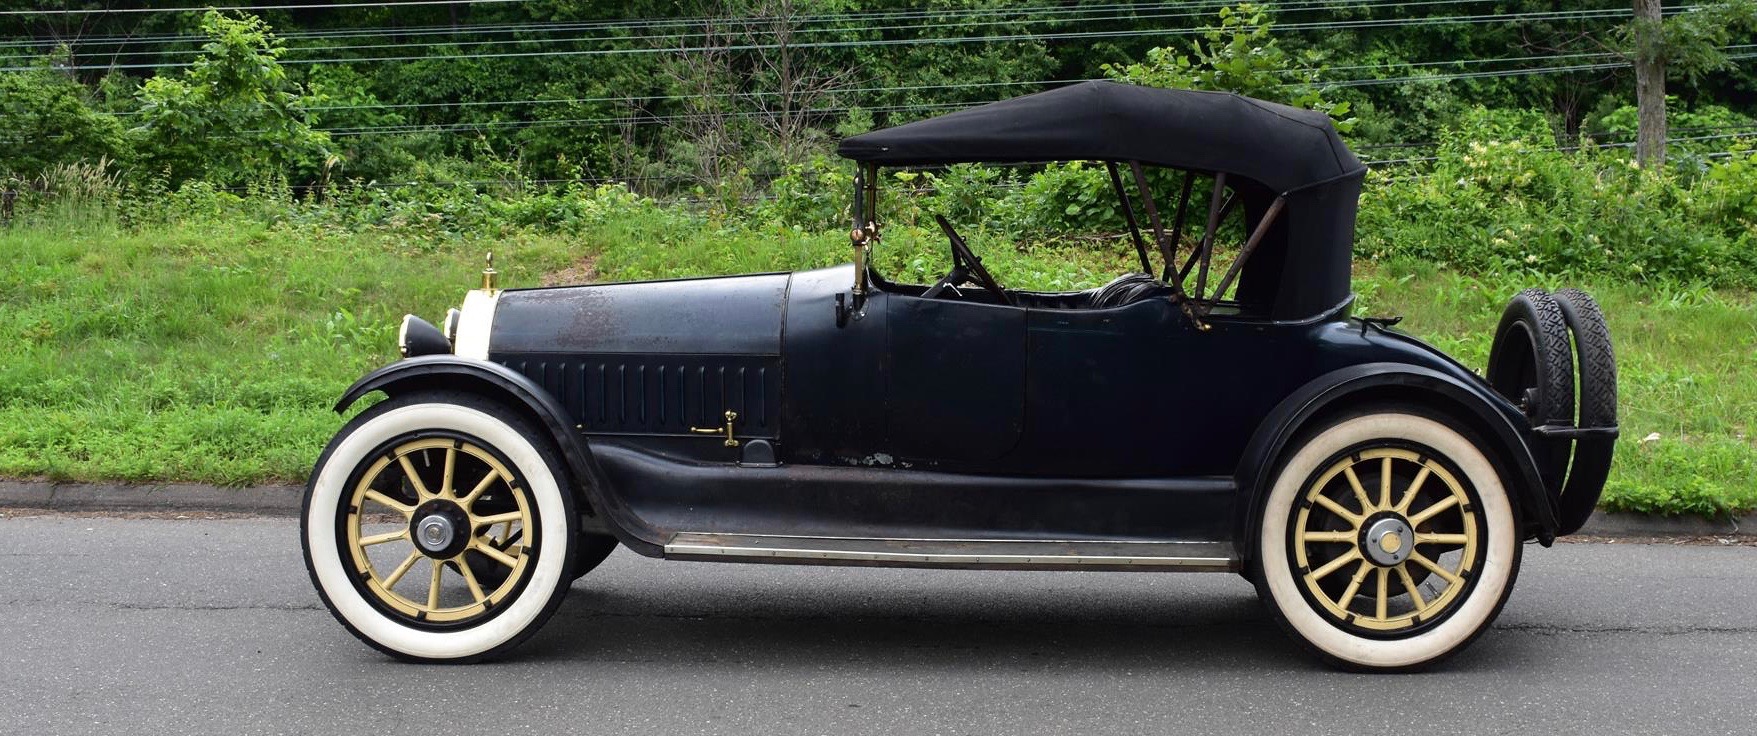 1915 Marmon, Marmon introduced its Model 41 after winning inaugural Indy 500, ClassicCars.com Journal